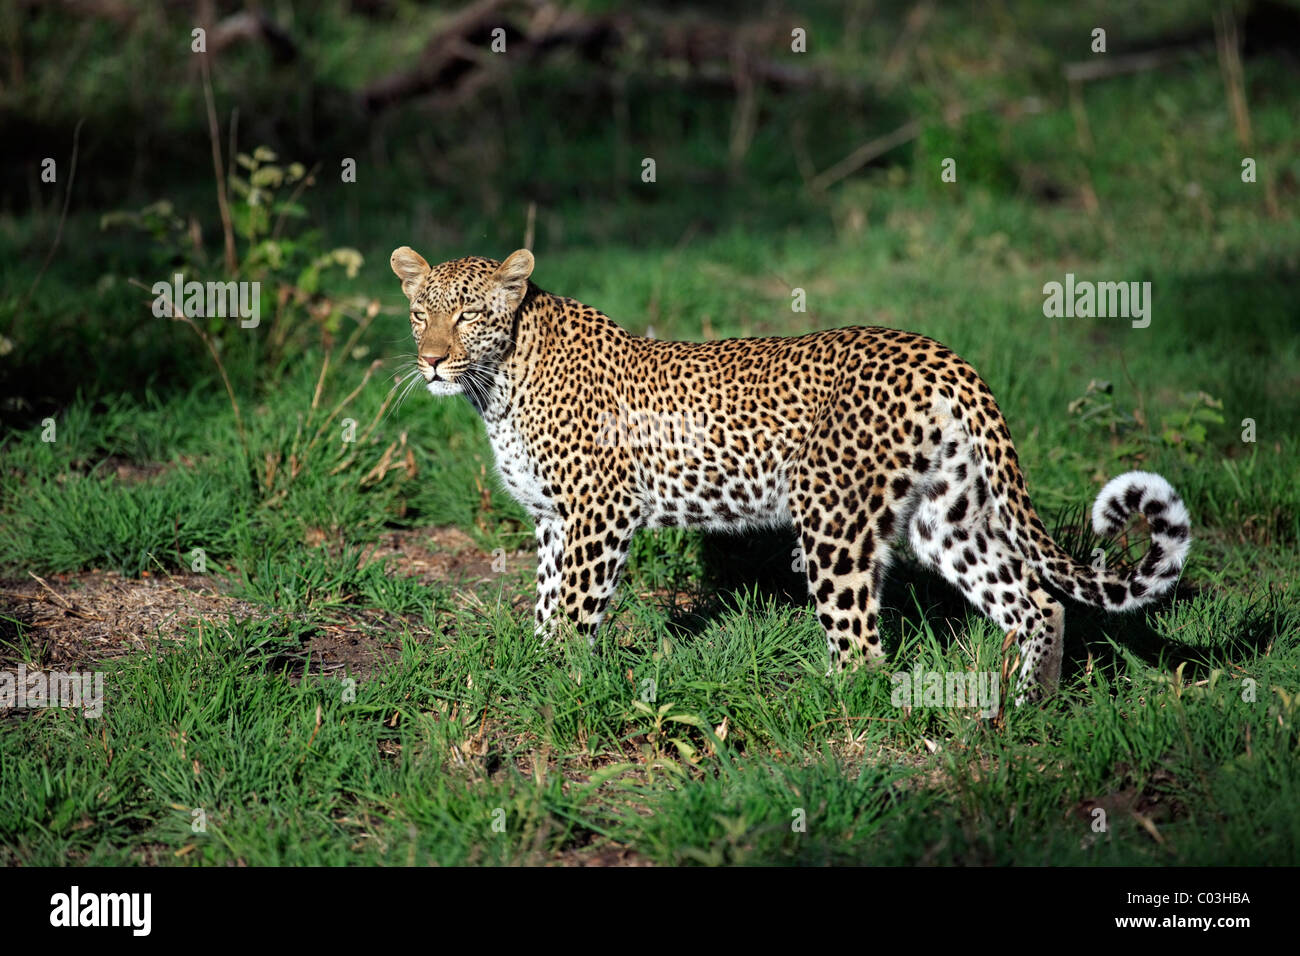 Leopard (Panthera pardus), female adult, Sabisabi Private Game Reserve, Kruger National Park, South Africa, Africa Stock Photo